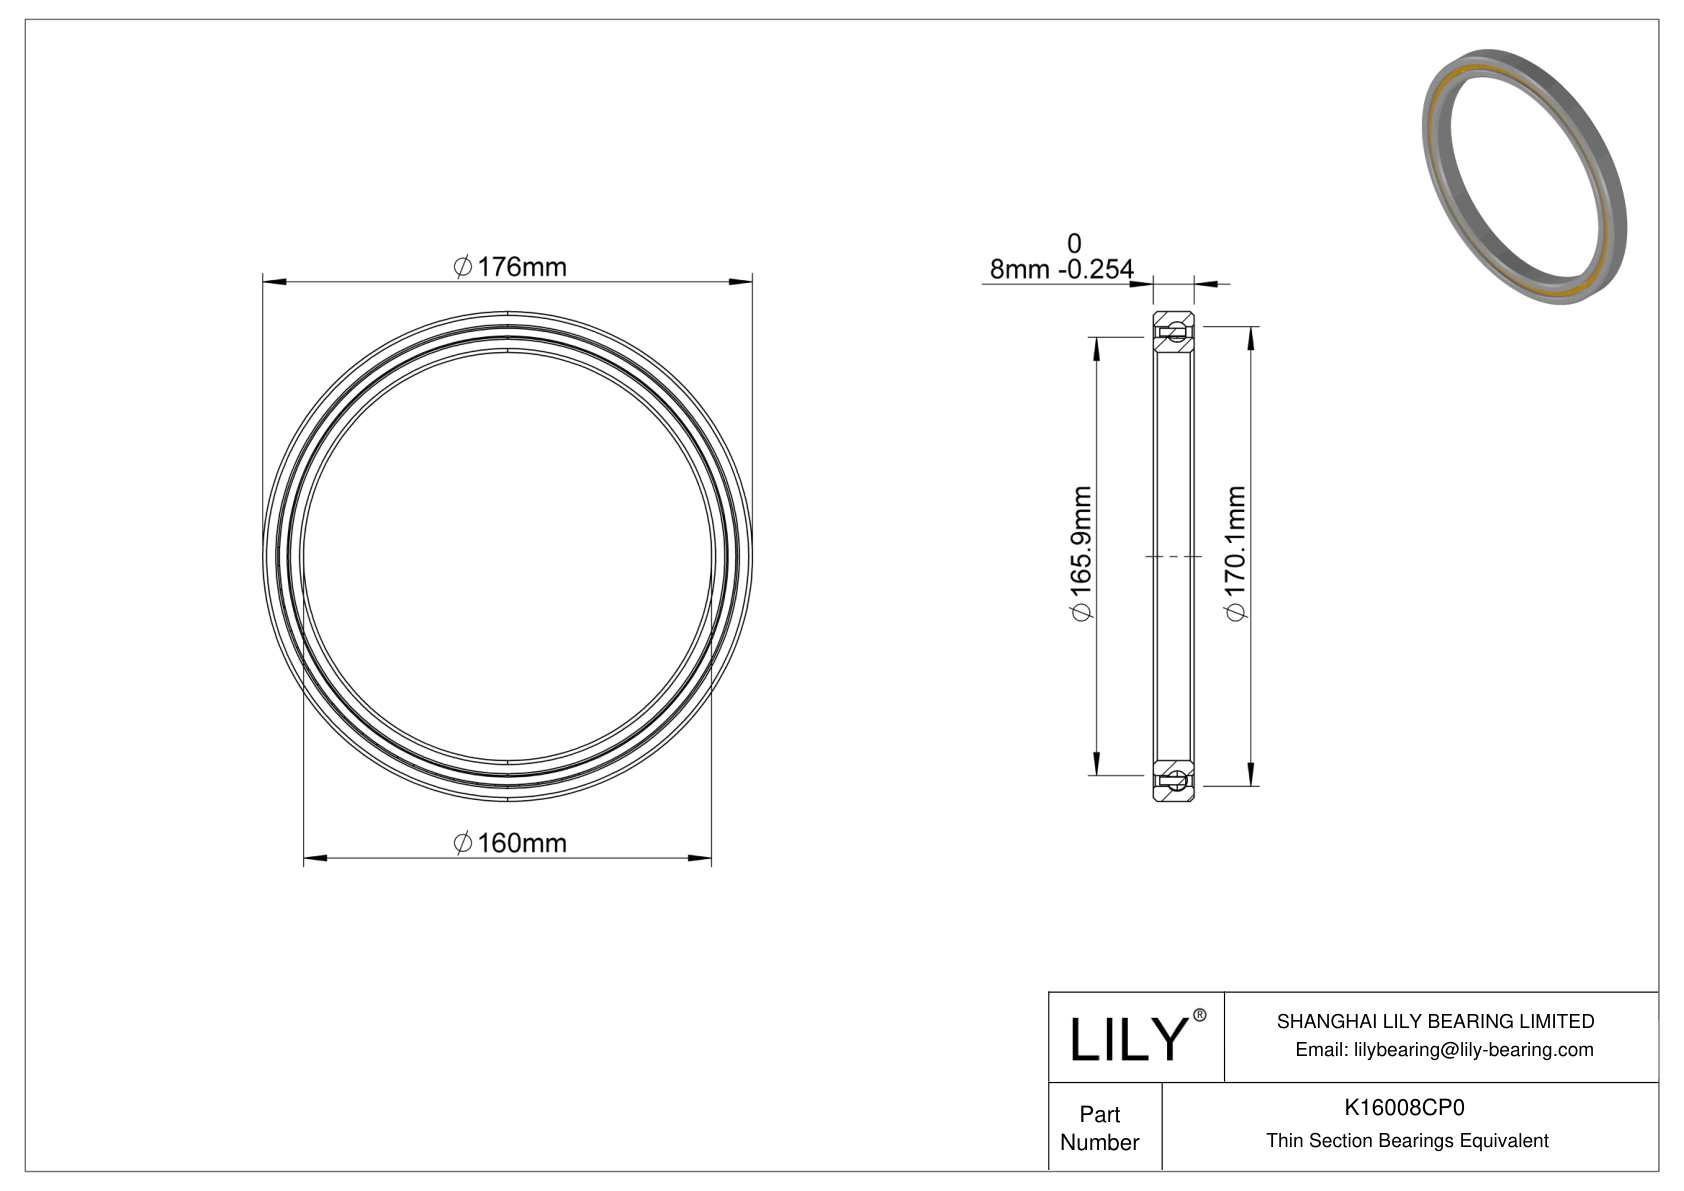 K16008CP0 Constant Section (CS) Bearings cad drawing